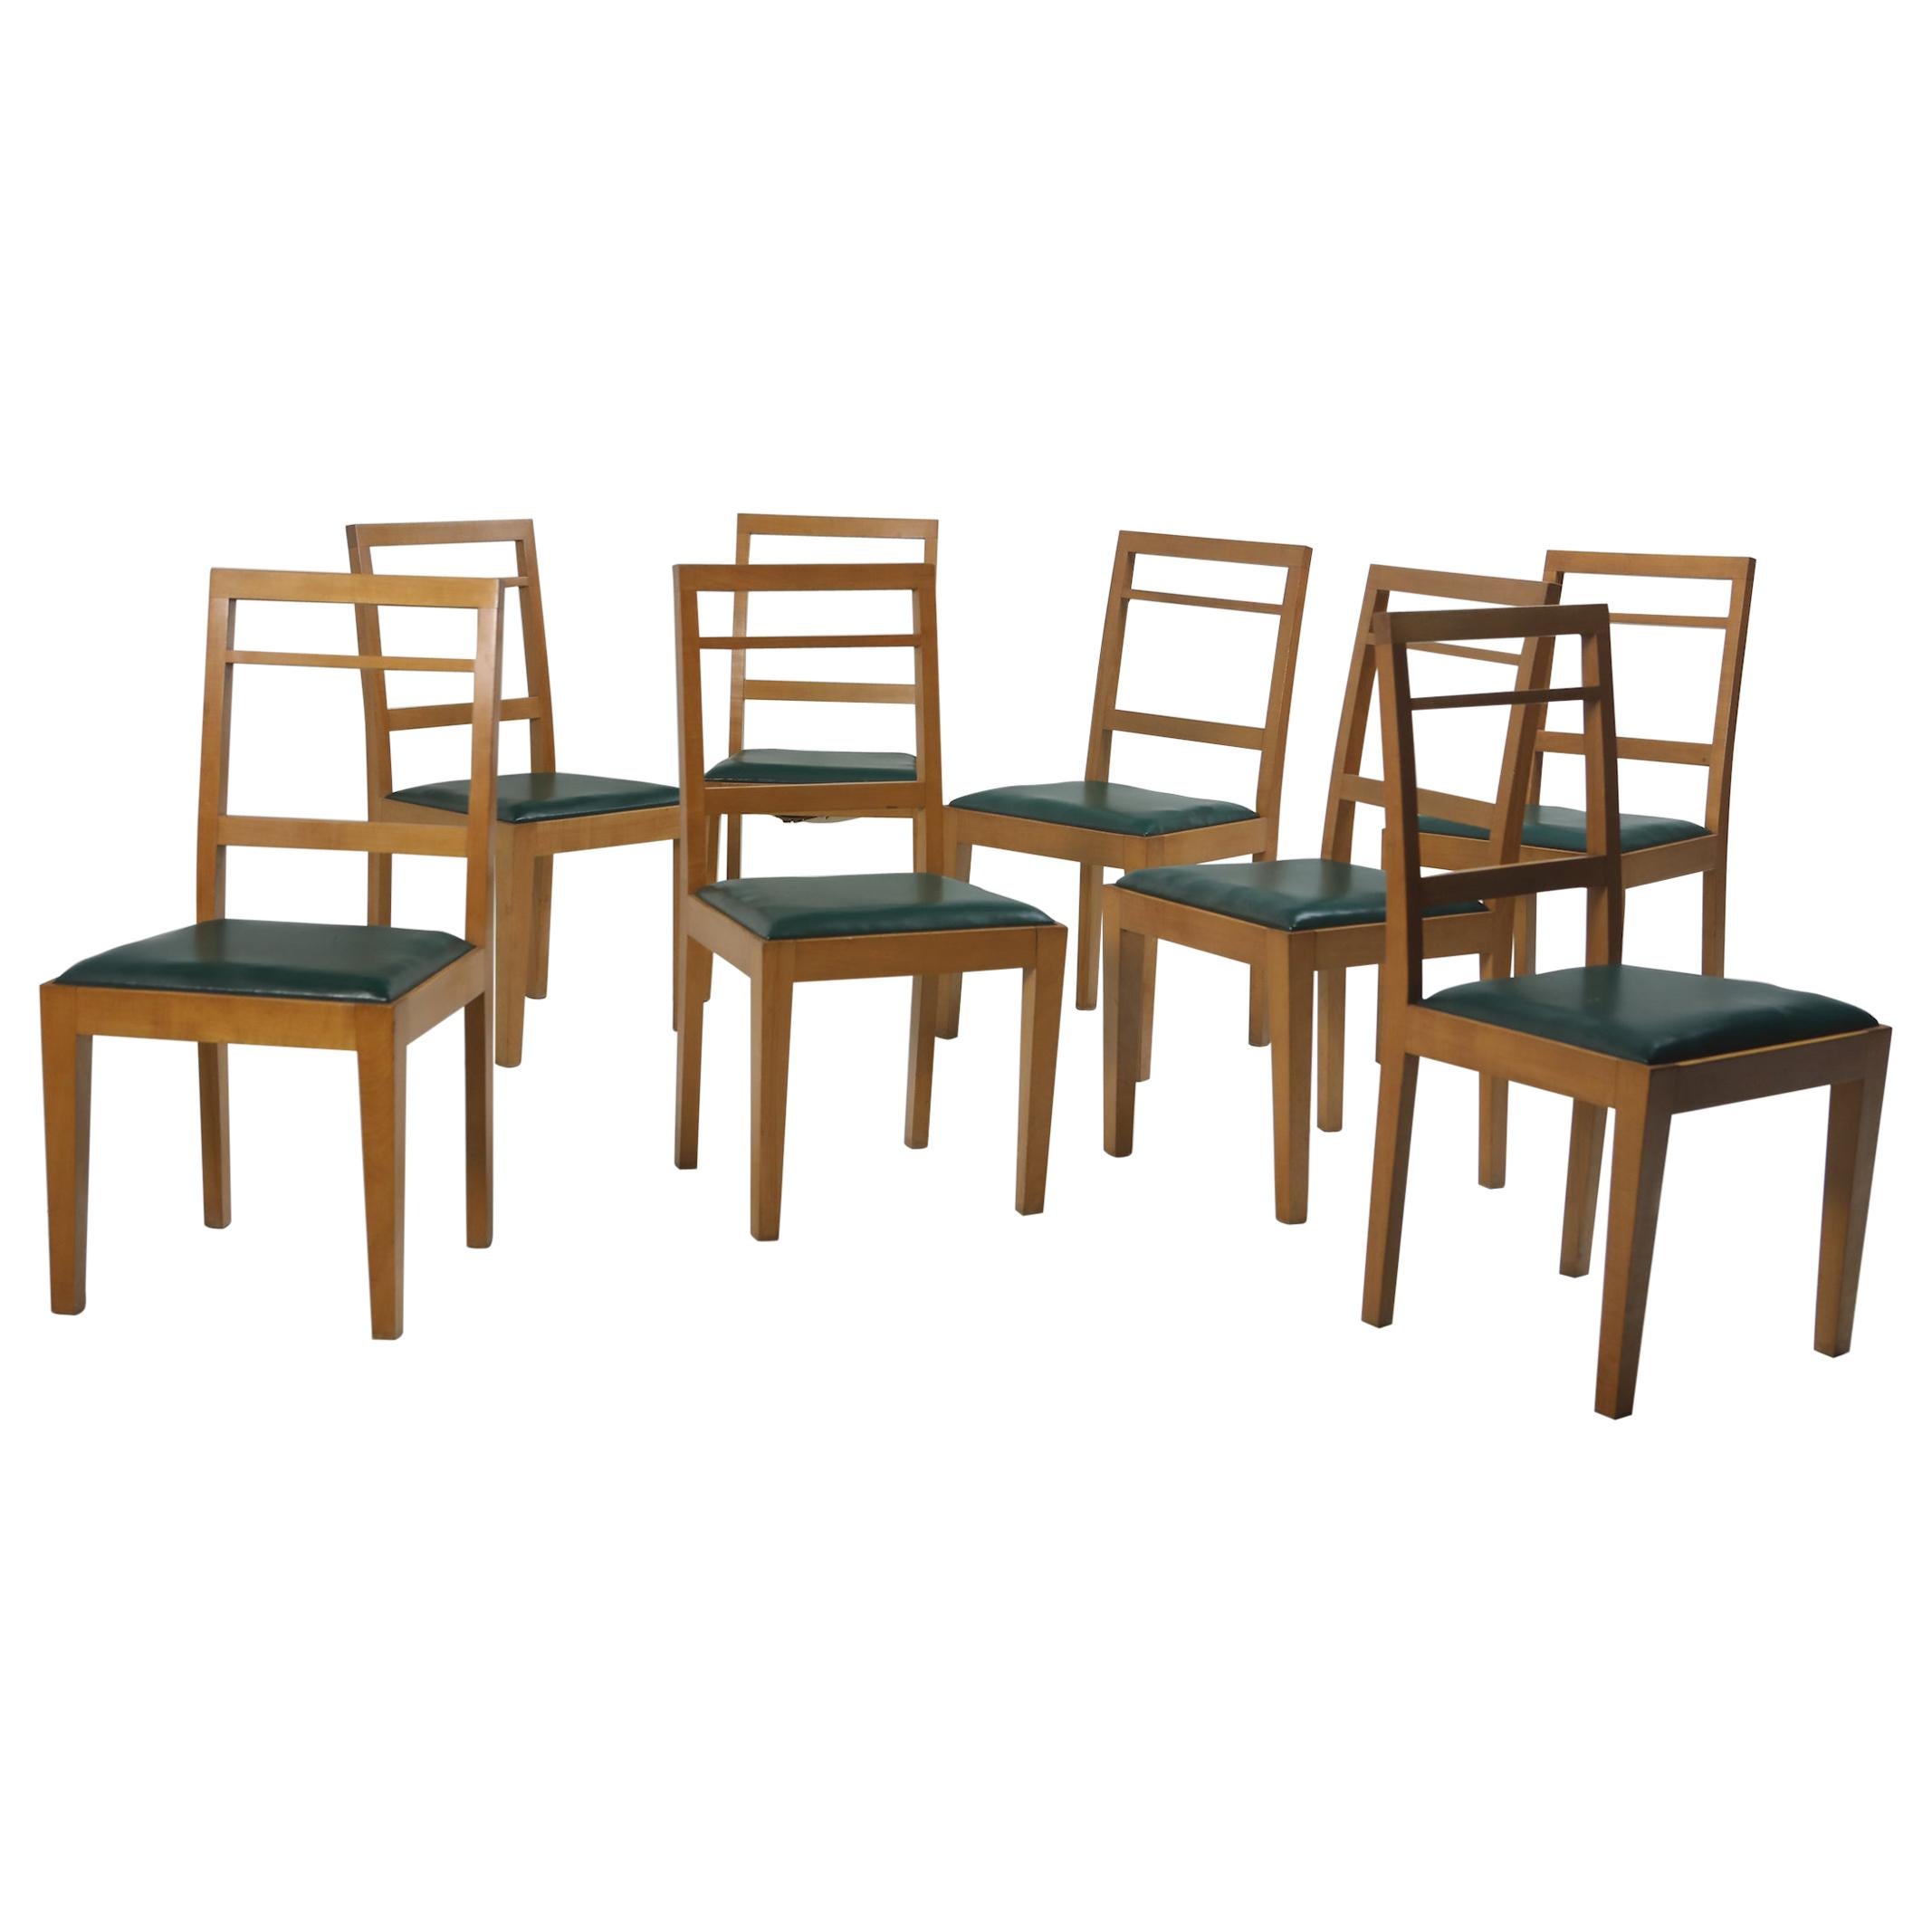 Mid-Century Modern Set of 8 Chairs in Wood and Leather, Brazil 1960s For Sale